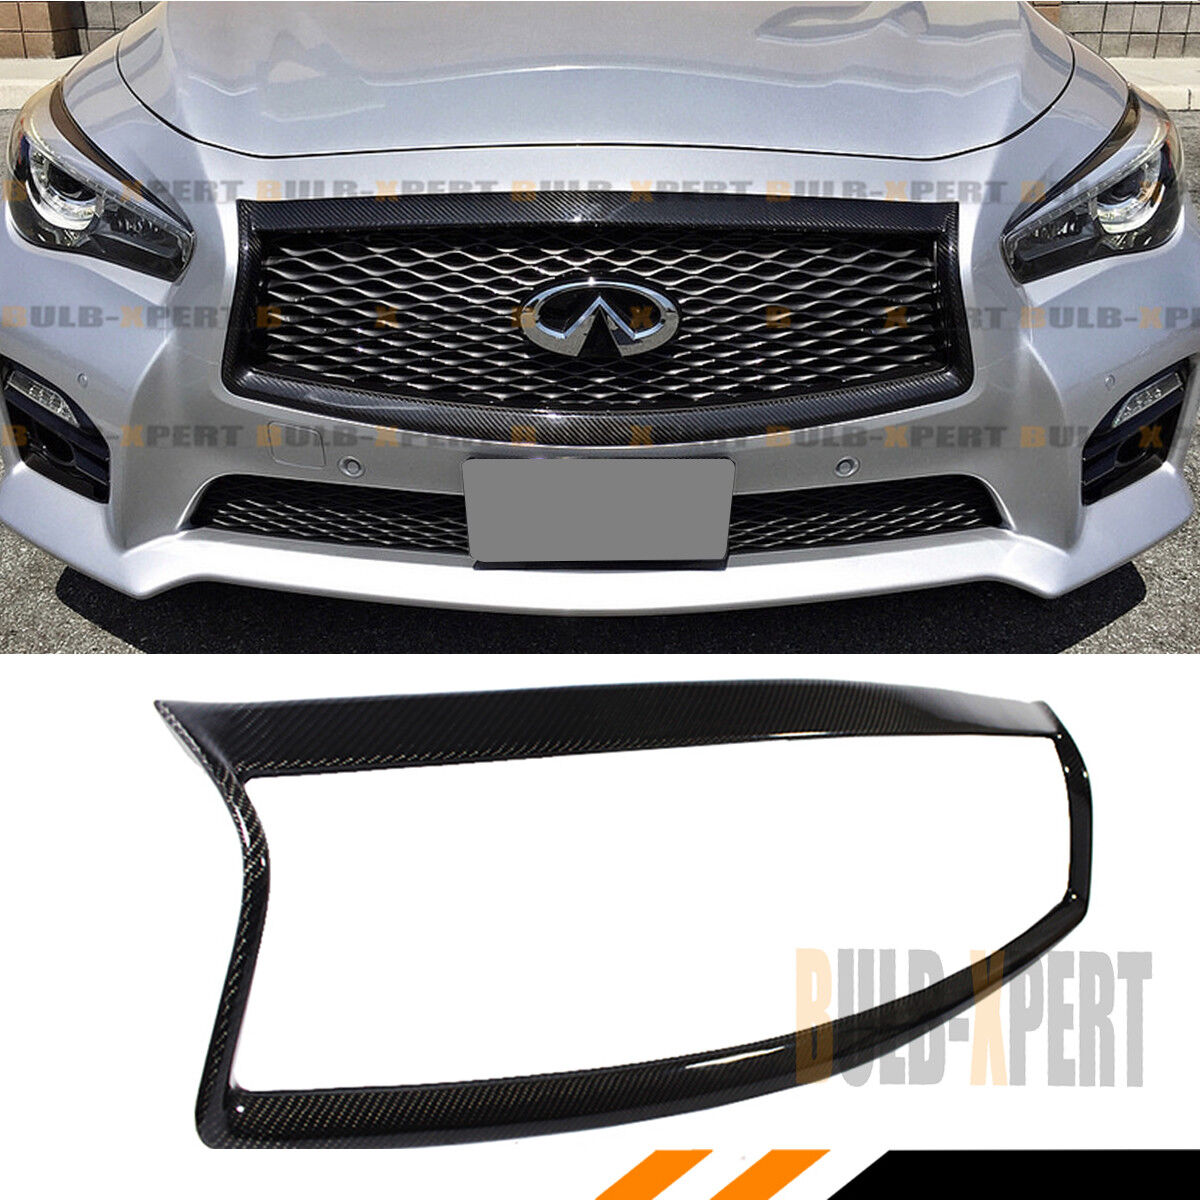 FOR:2014-2017 INFINITI Q50 S CARBON FIBER FRONT GRILL OUTLINE TRIM COVER OVERLAY